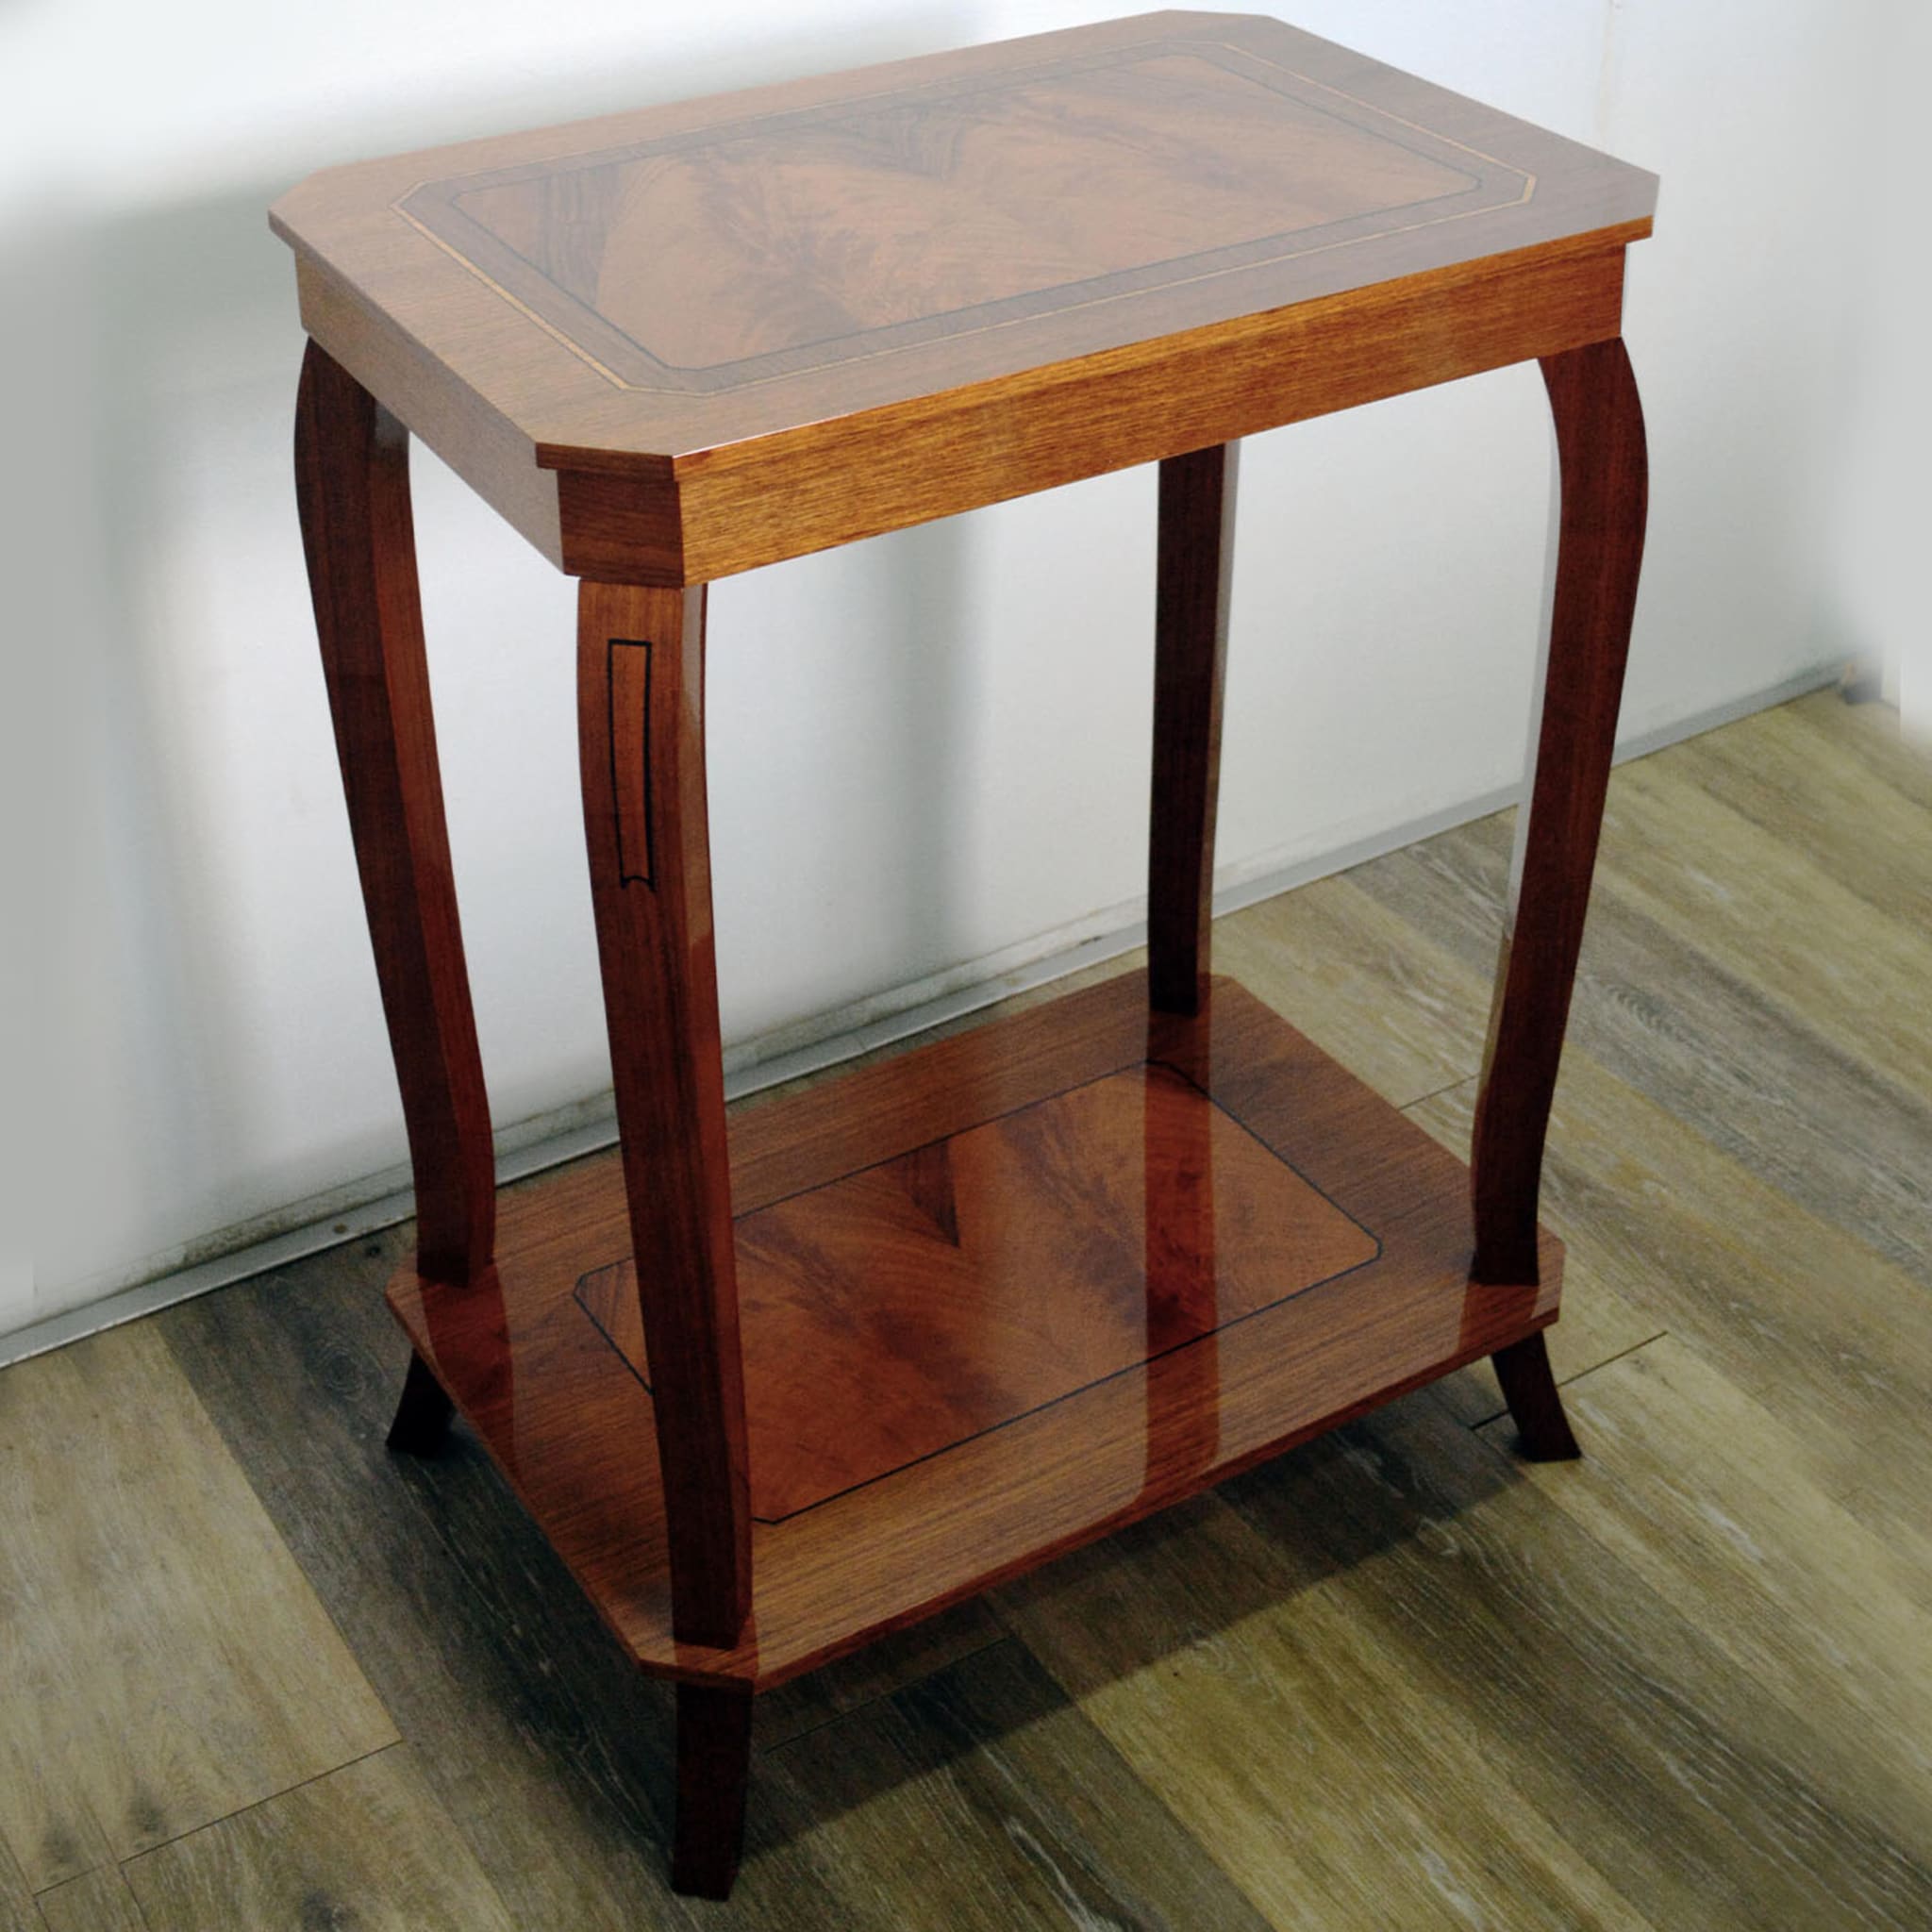 Musical Walnut Side Table with Storage Unit - Alternative view 1